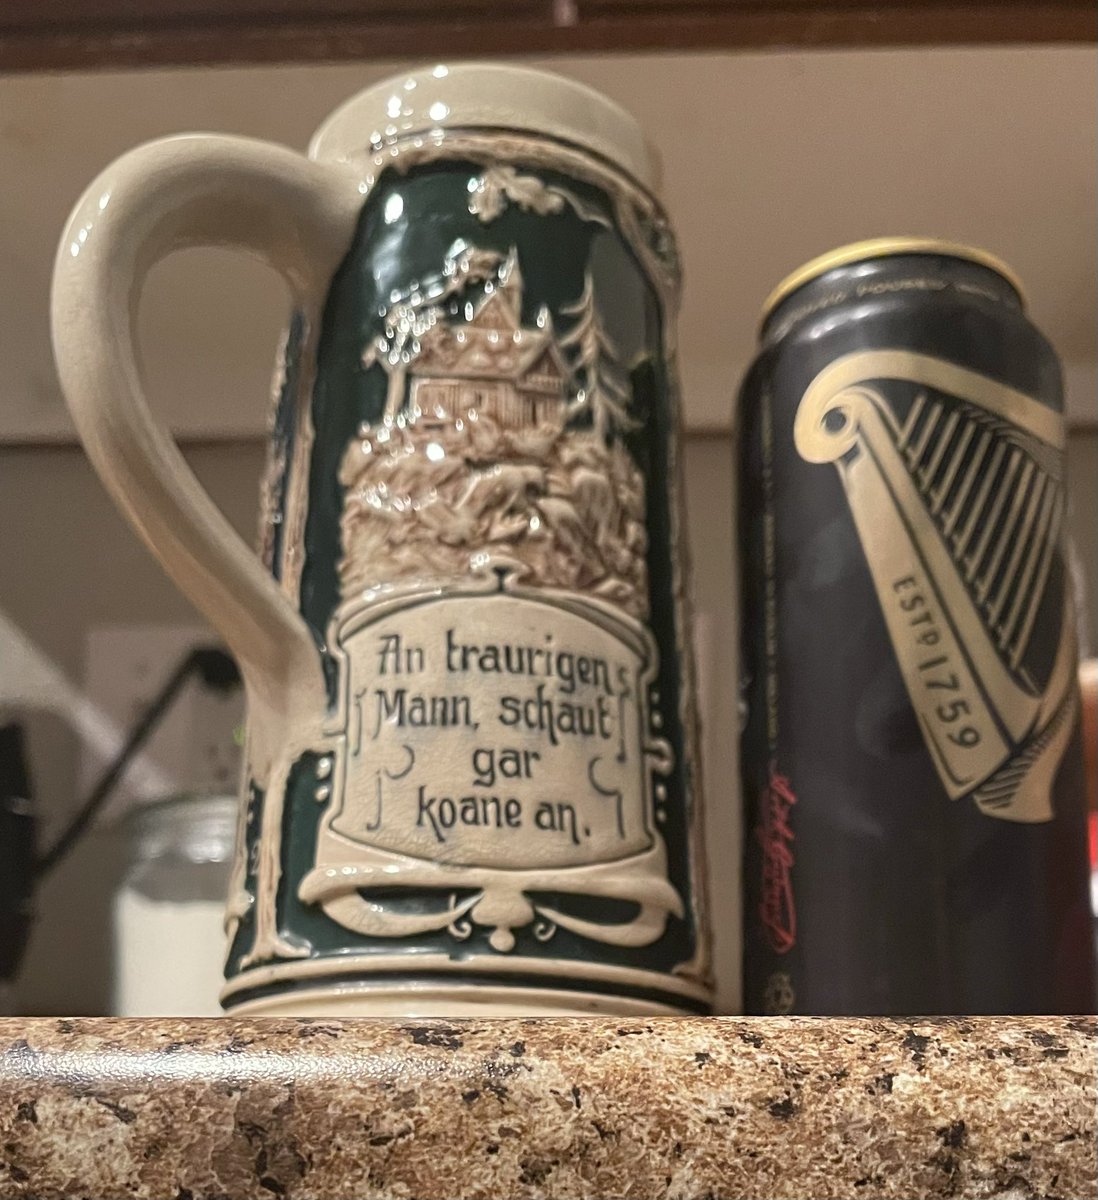 This beer stein is prob 70 years old .. with a nice cold #guinessbeer